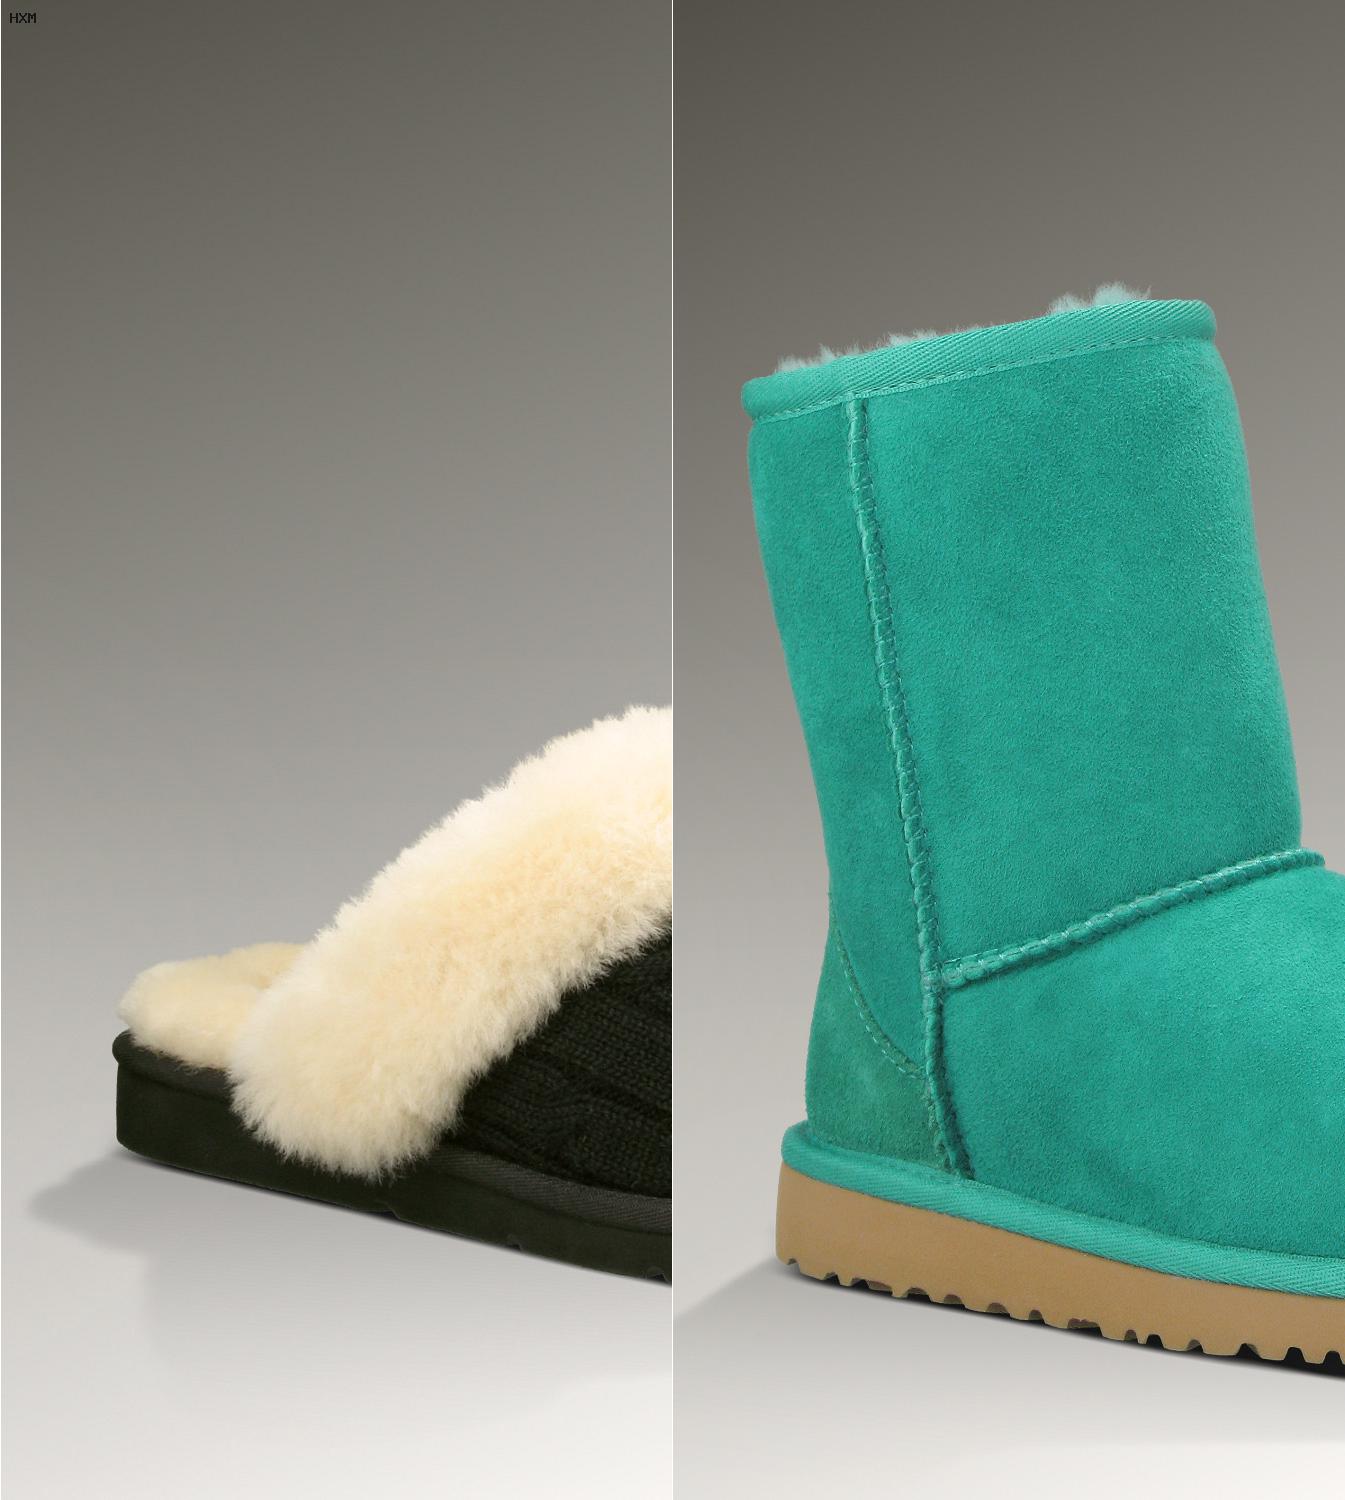 chaussures ugg luxembourg